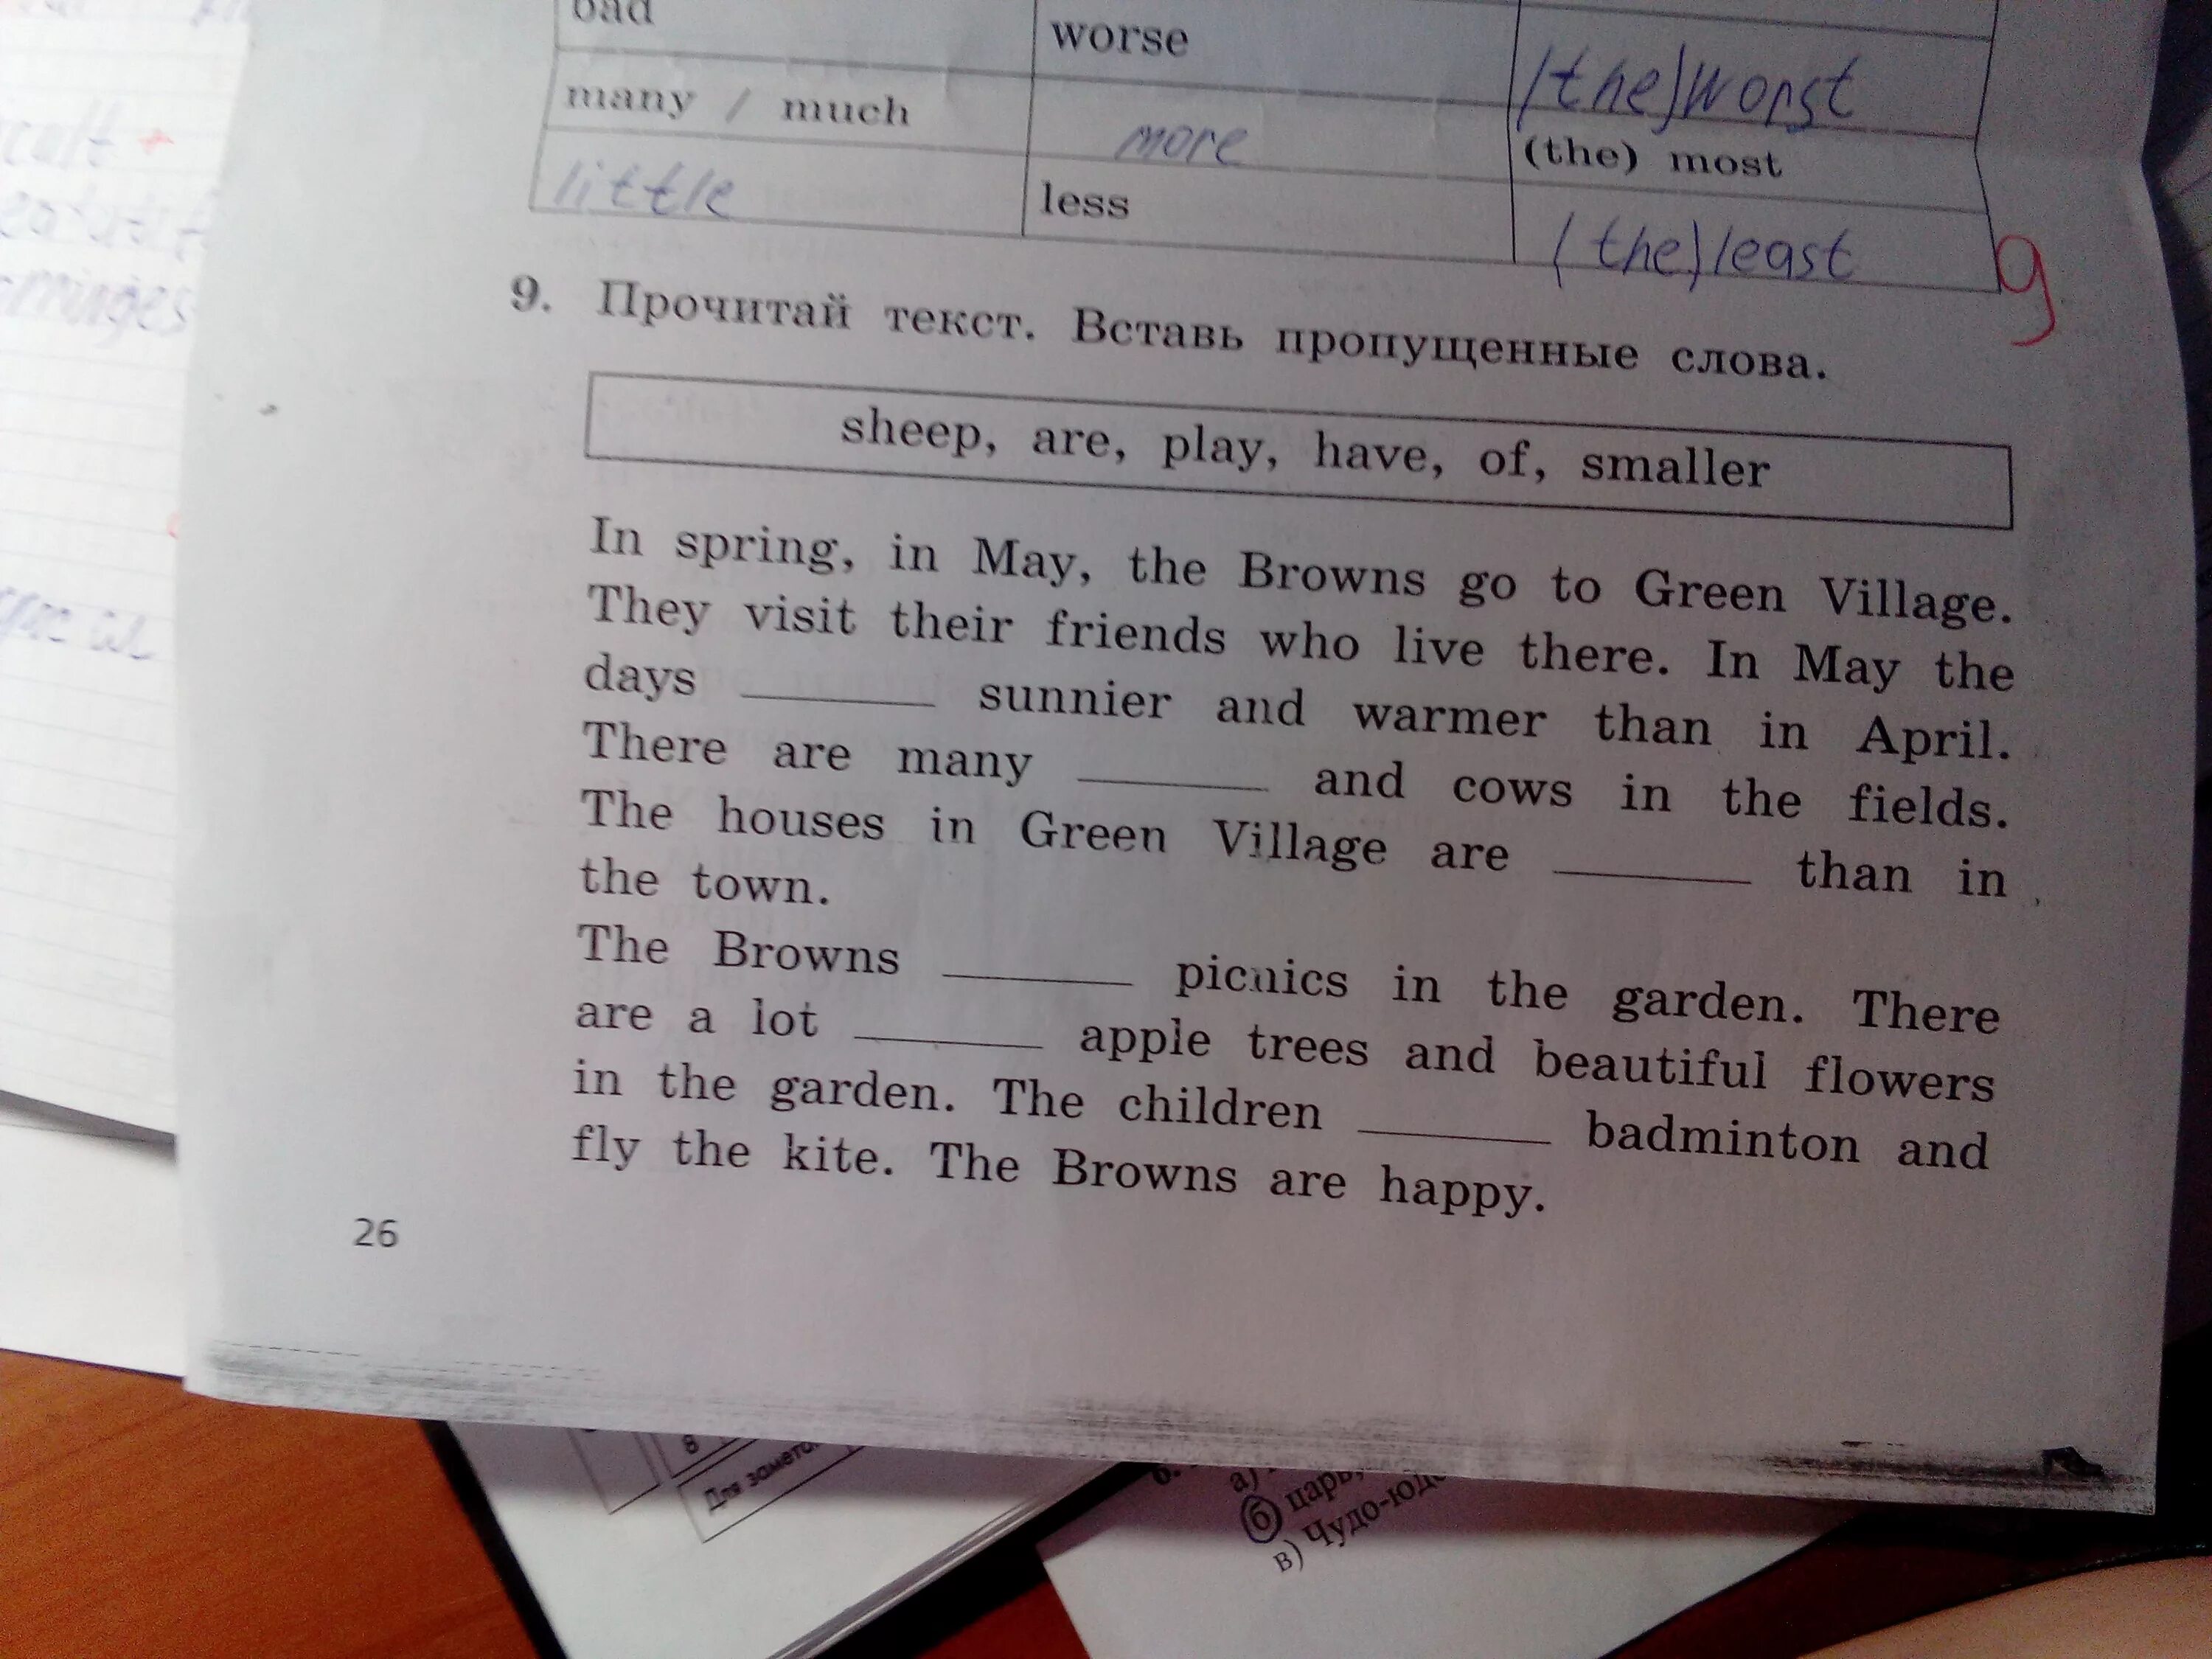 In Spring in May the Browns go to Green Village вставить пропущенные слова. Прочитай текст вставь пропущенные слова. Вставьте пропущенные слова was were. Вставьте пропущенные слова is and are and was and were. Заполнить недостающий текст